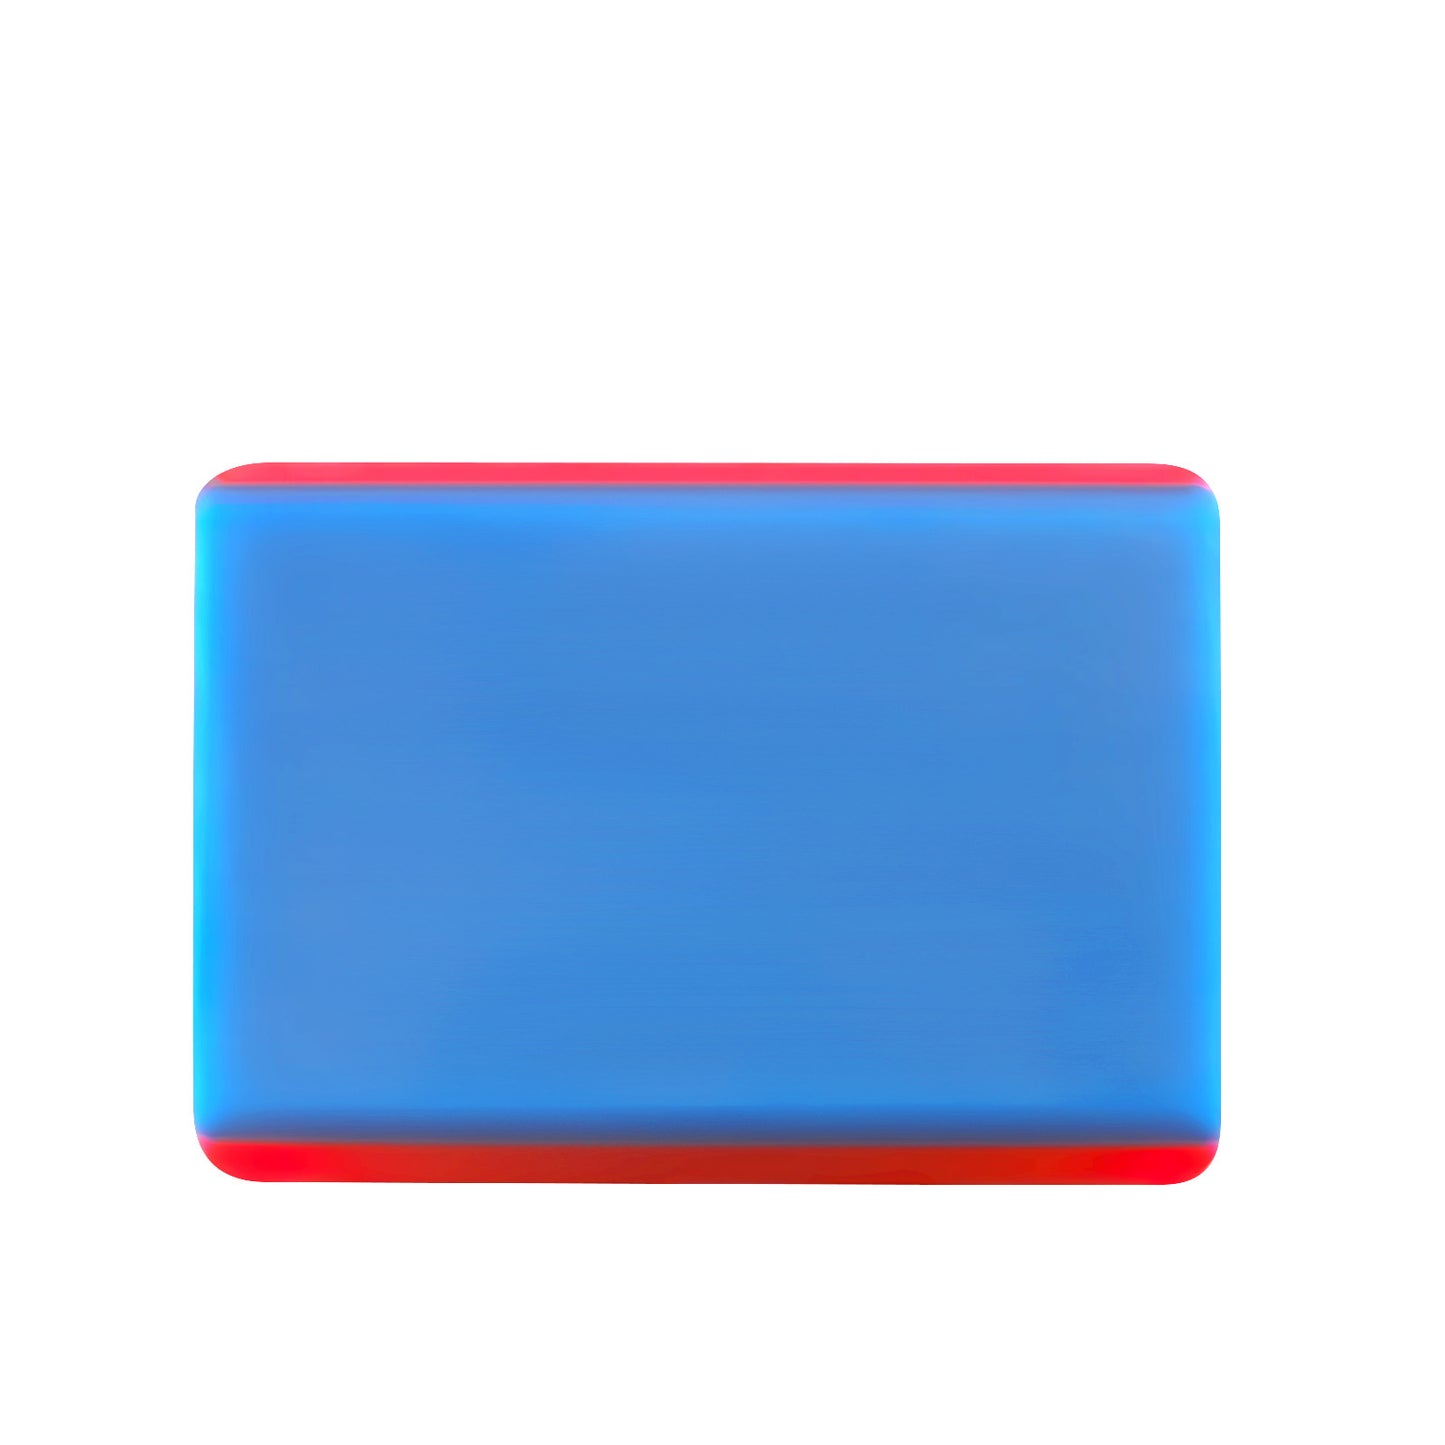 Double Edge PPF Squeegee 2-Layer-REC in blue, showcasing its rectangular shape and dual-layer design for enhanced film installation.